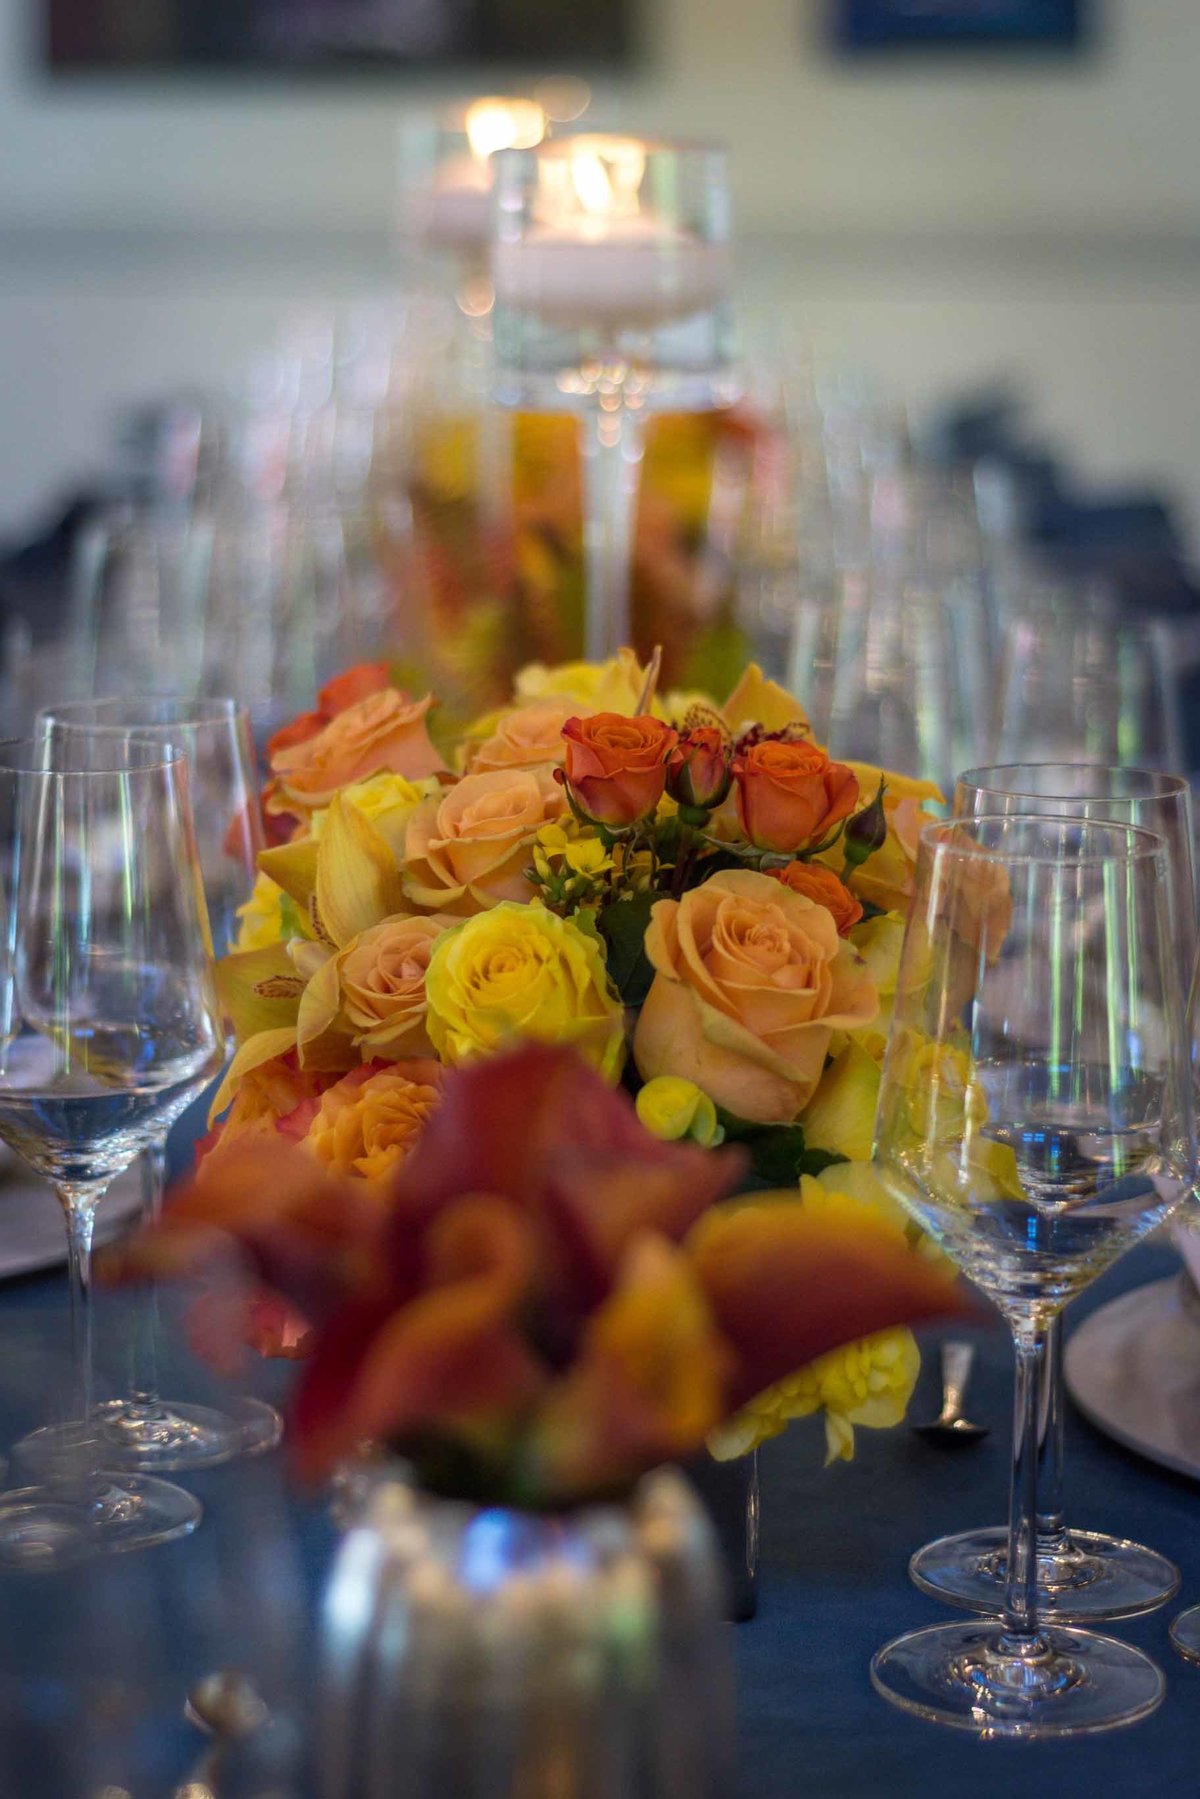 lont table lined with centerpieces of orange roses and orange calla lilies  on blue linen